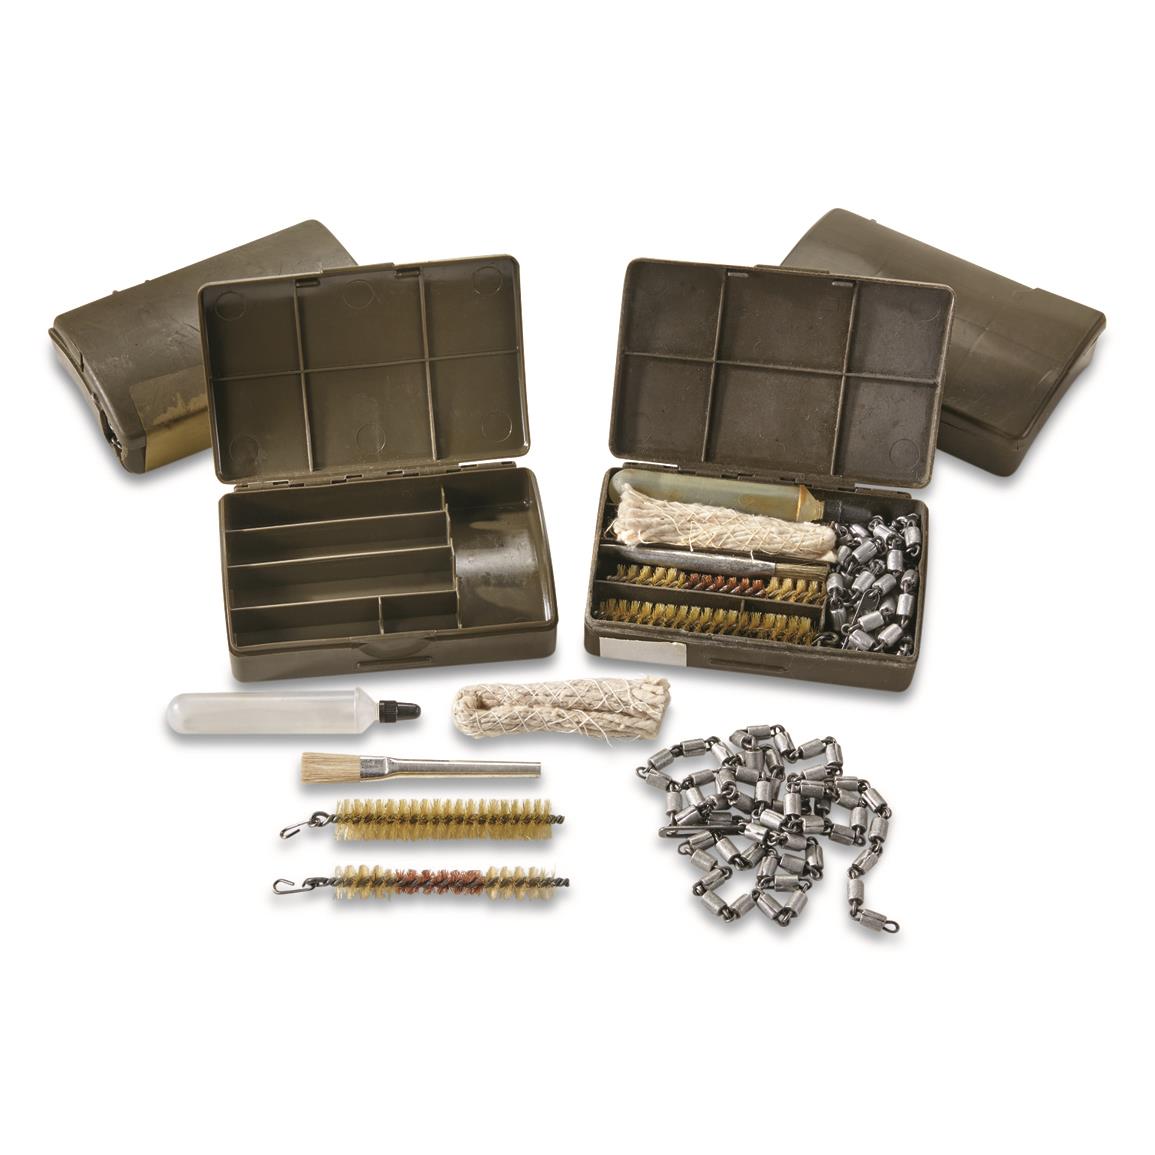 German army surplus g3 military rifle cleaning kit in case 